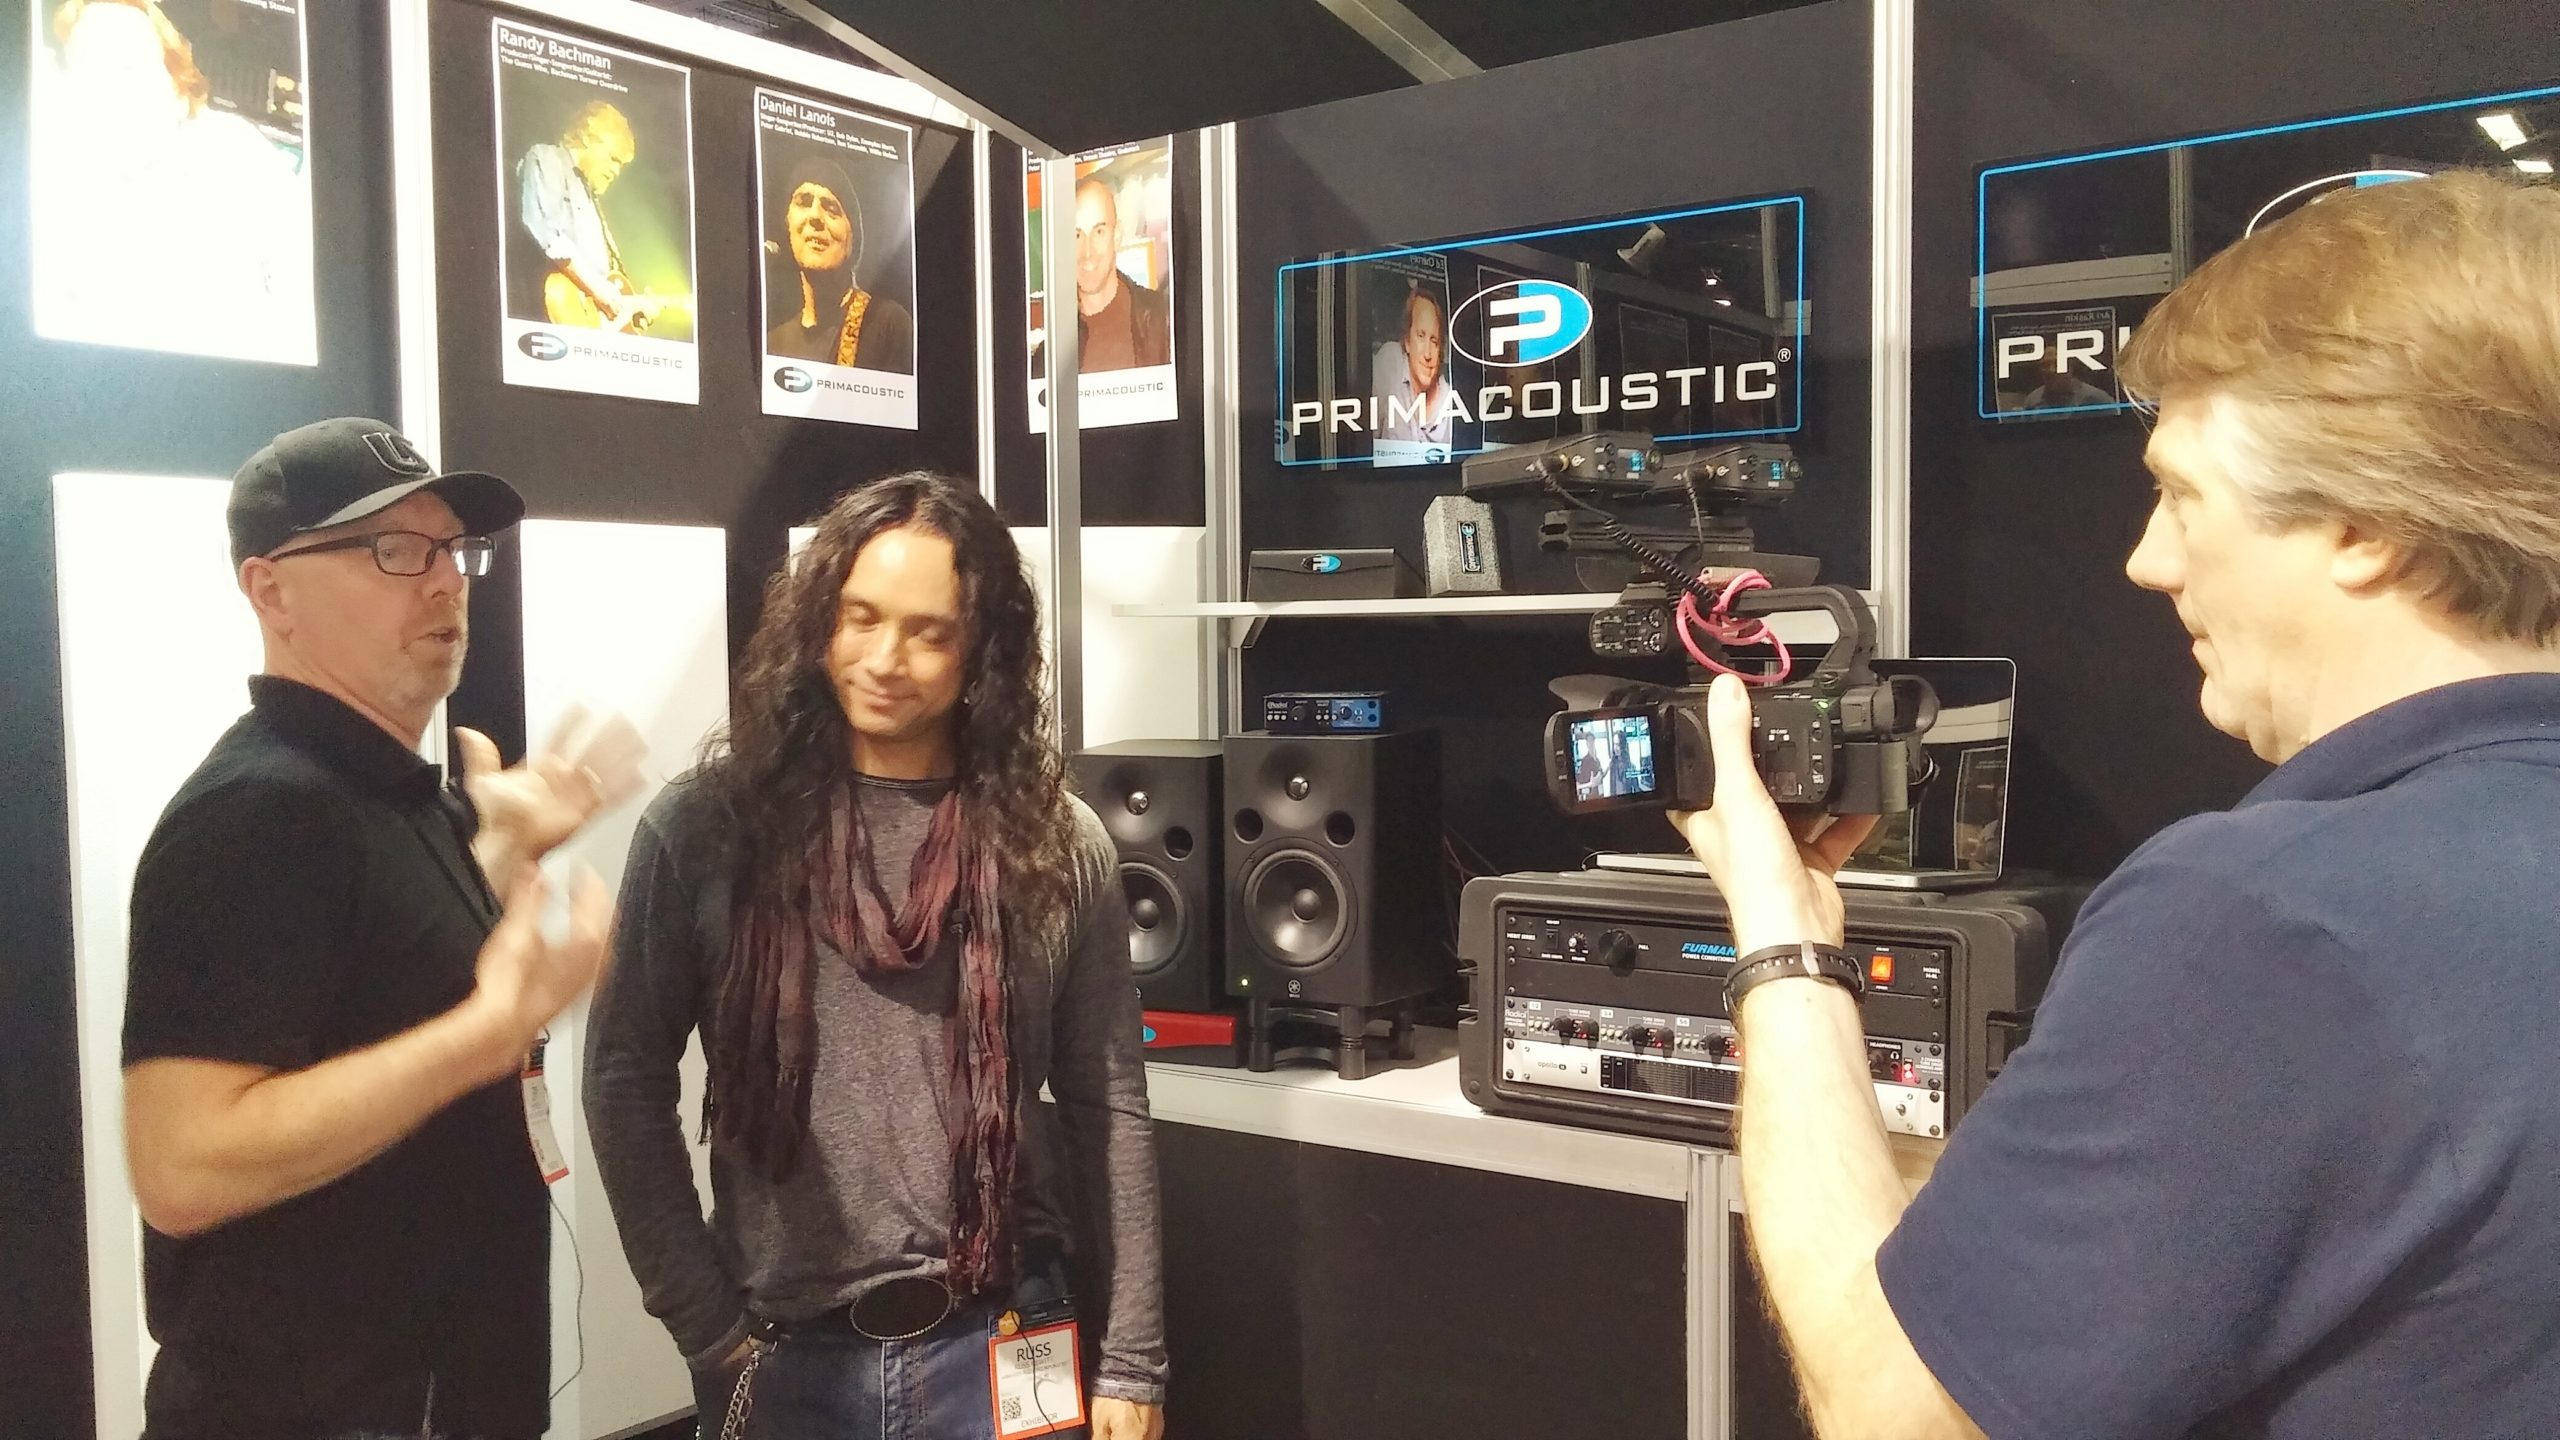 Interview at the Radial/Primacoustic booth at NAMM